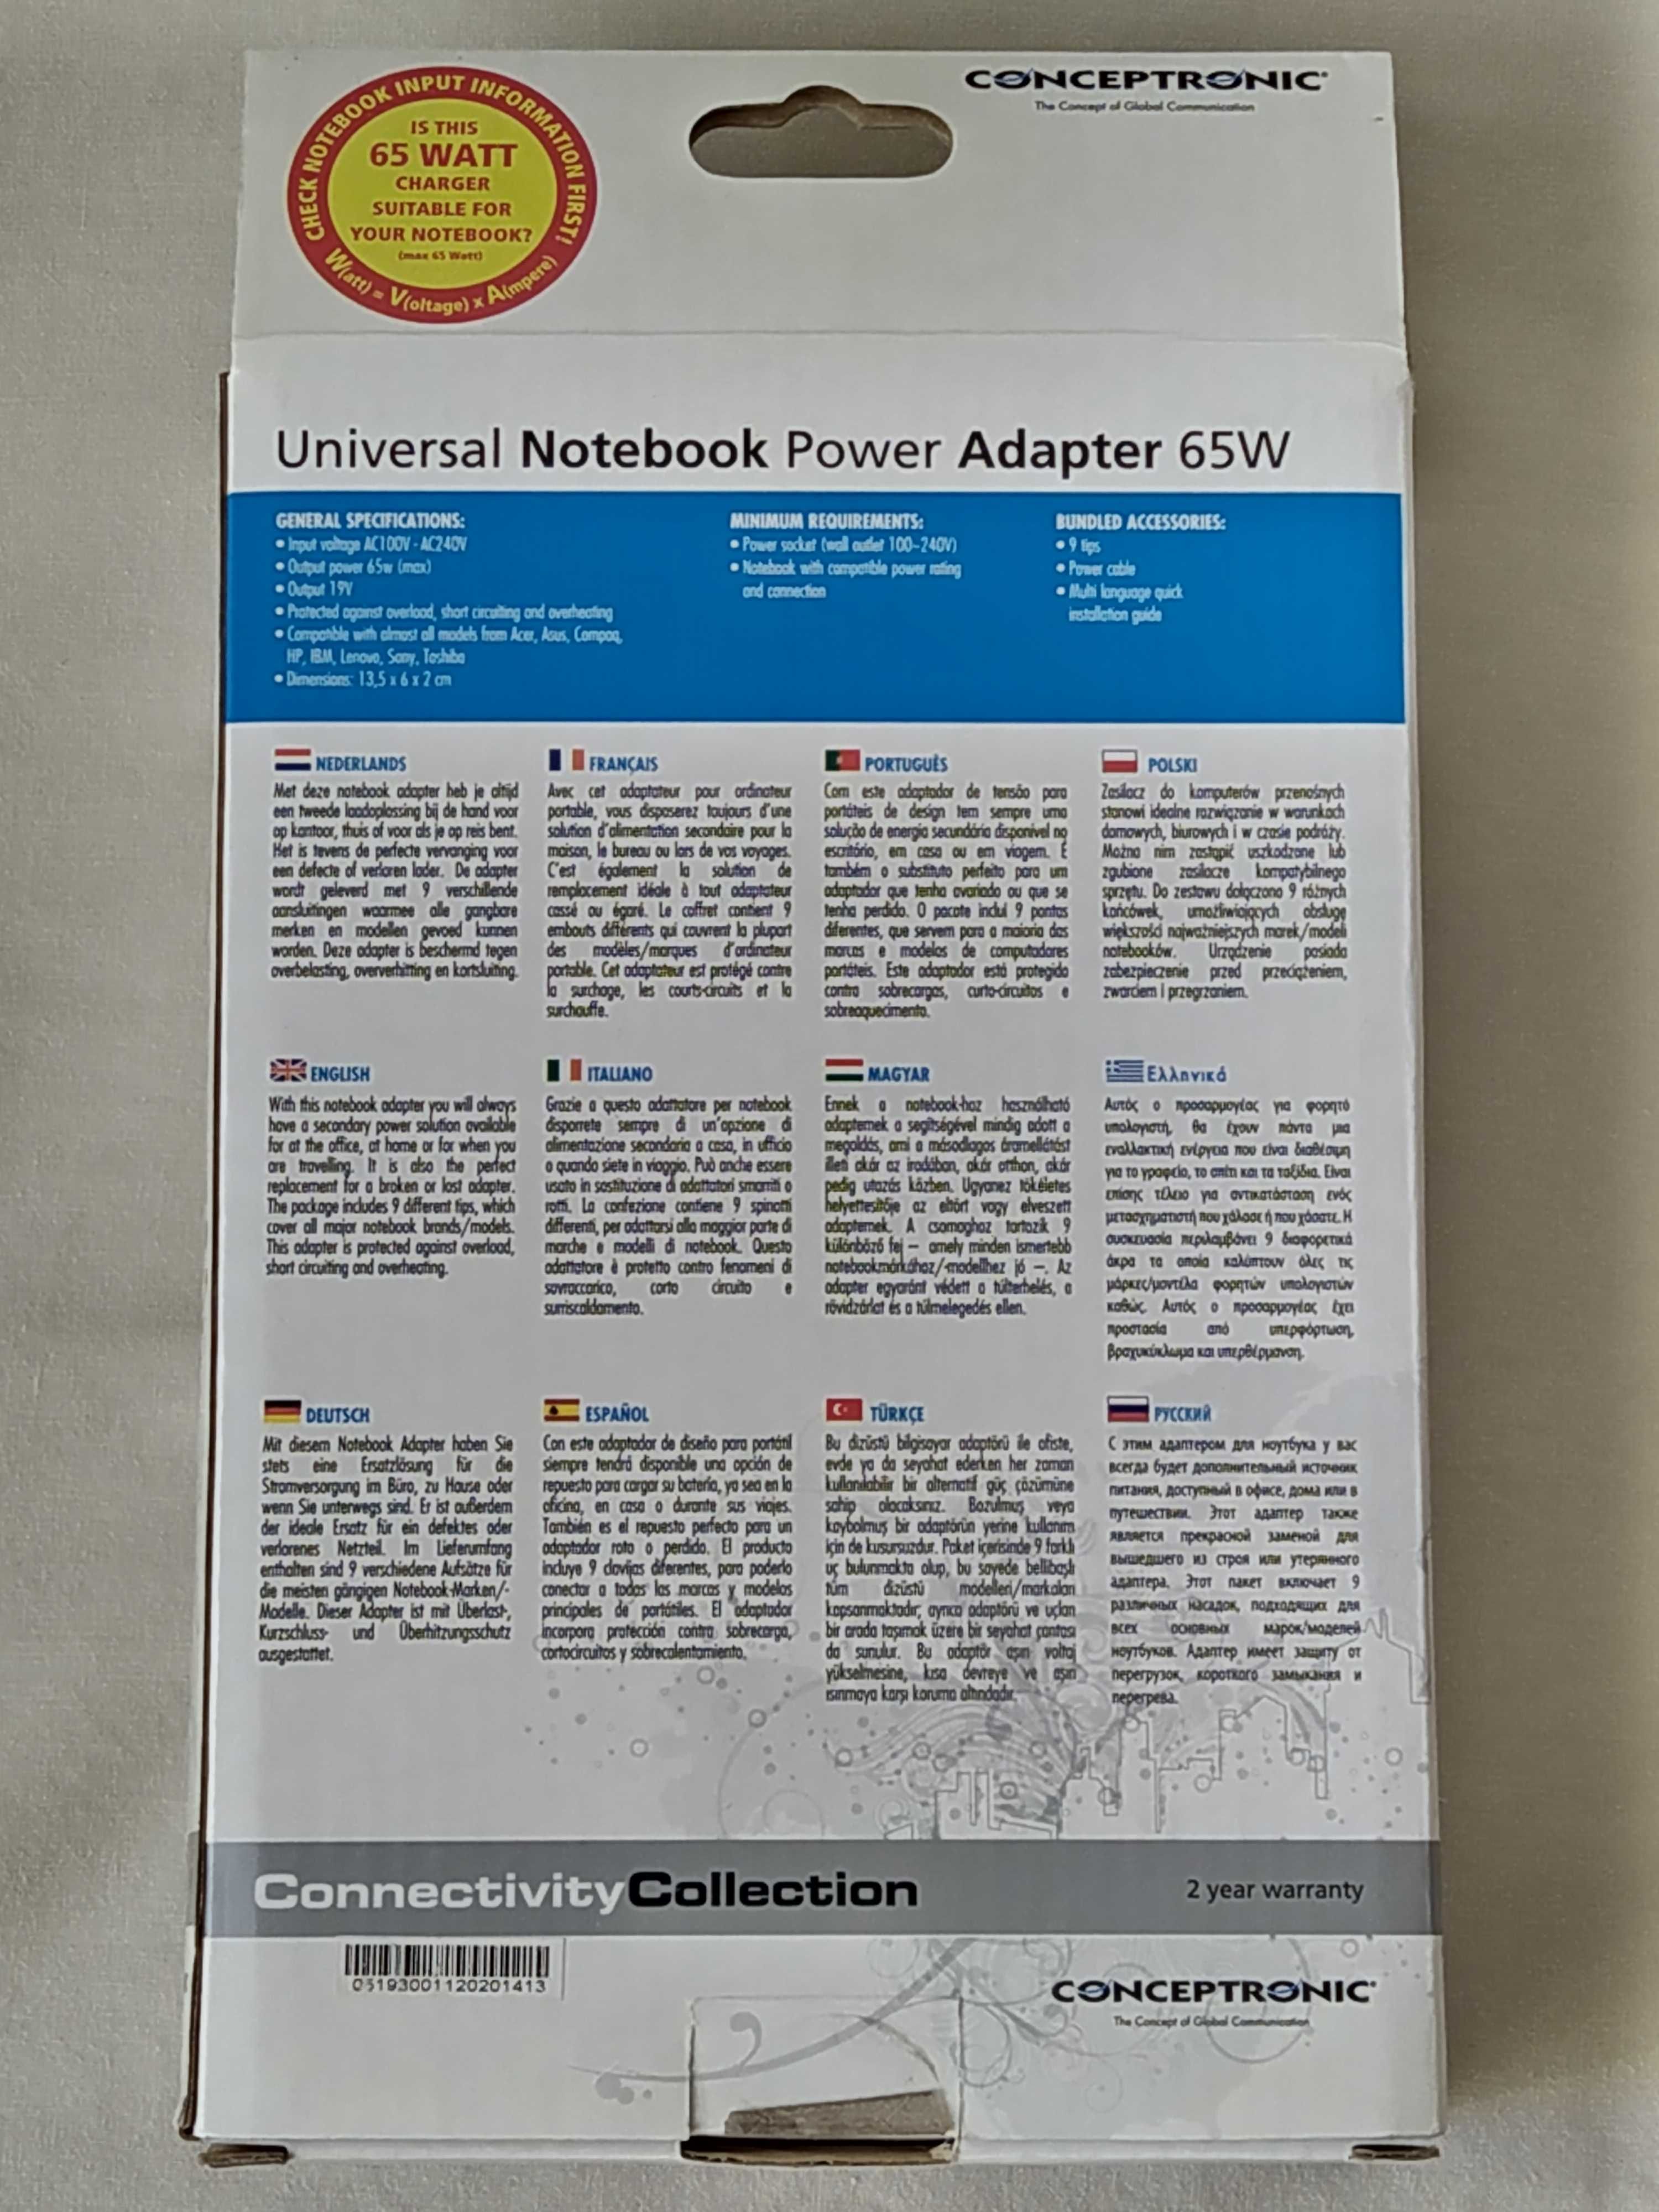 Universal Notebook Adapter 65W - CONCEPTRONIC